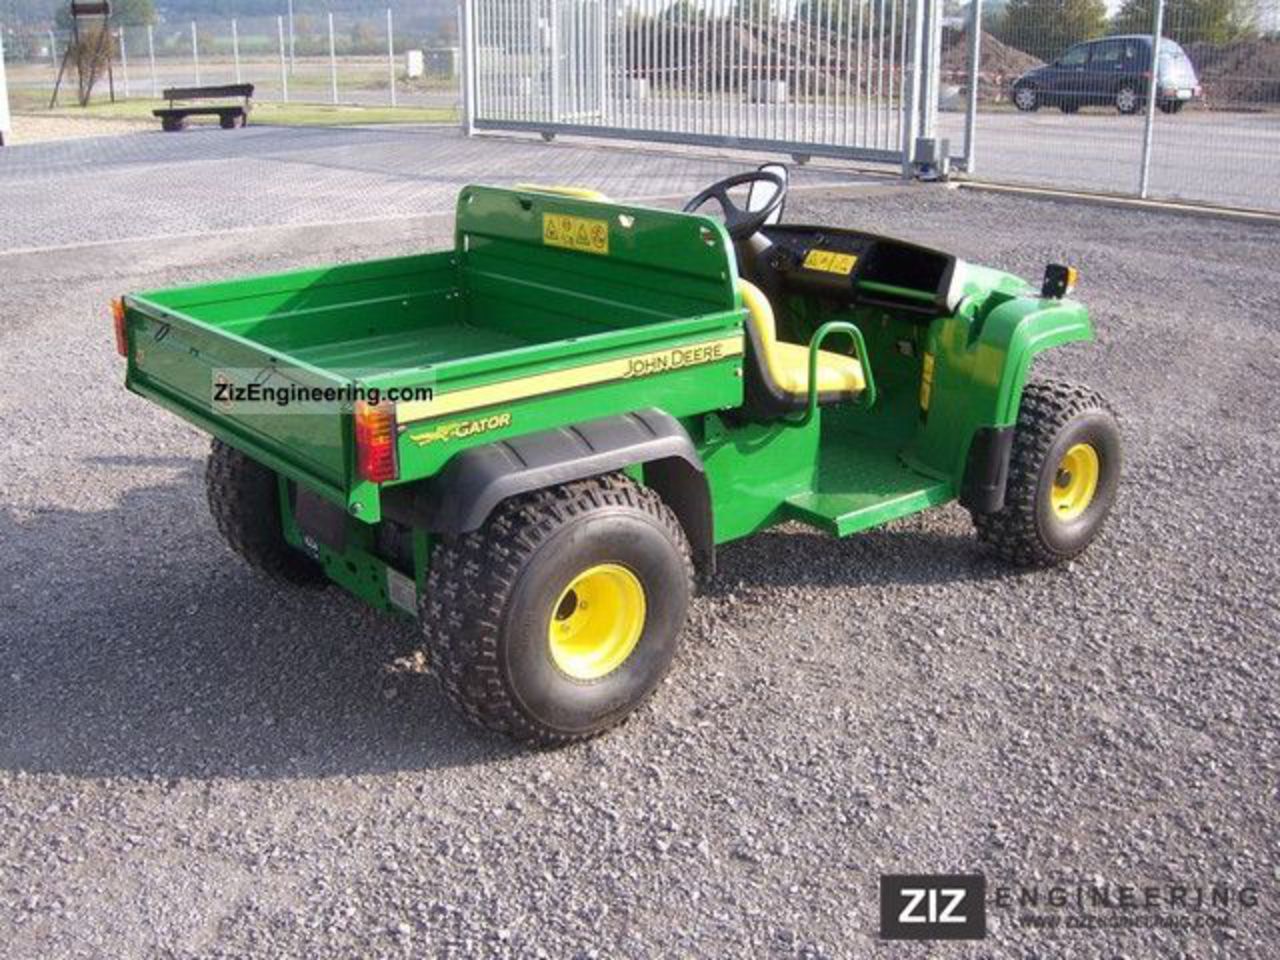 John Deere GATOR TS 2010 Agricultural Loader wagon Photo and Specs